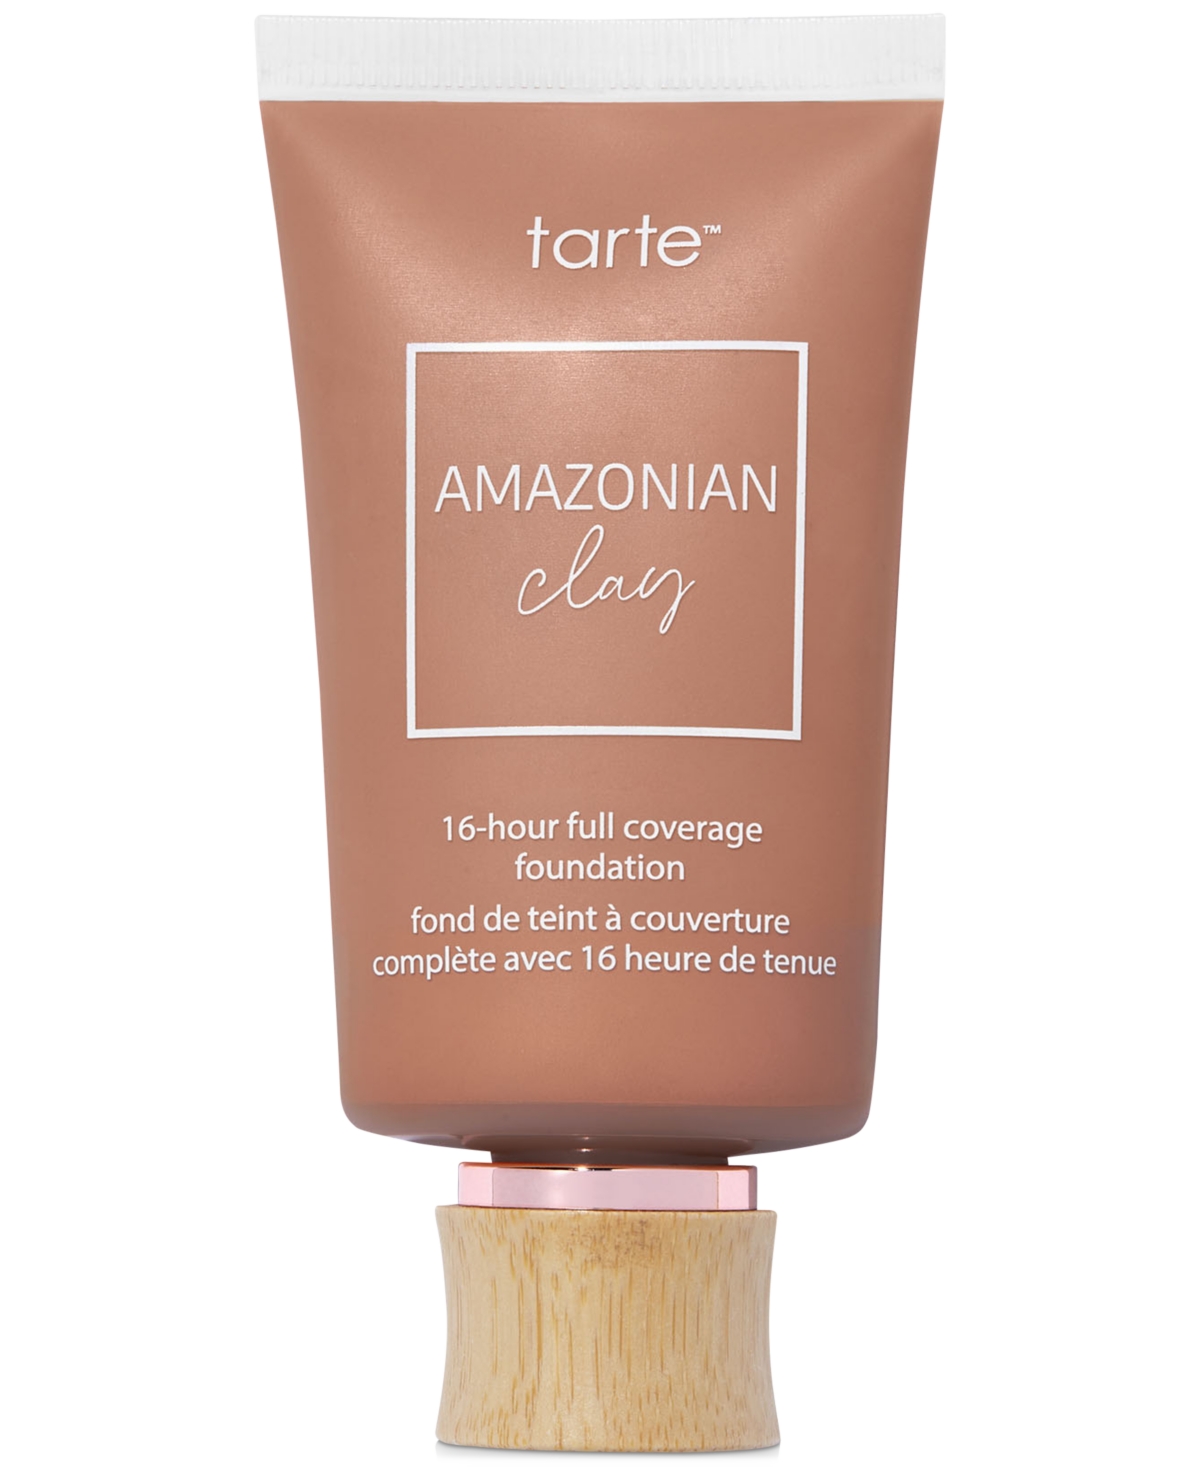 Tarte Amazonian Clay 16-hour Full Coverage Foundation In Hdeephoney - Deep Skin With Warm,peach